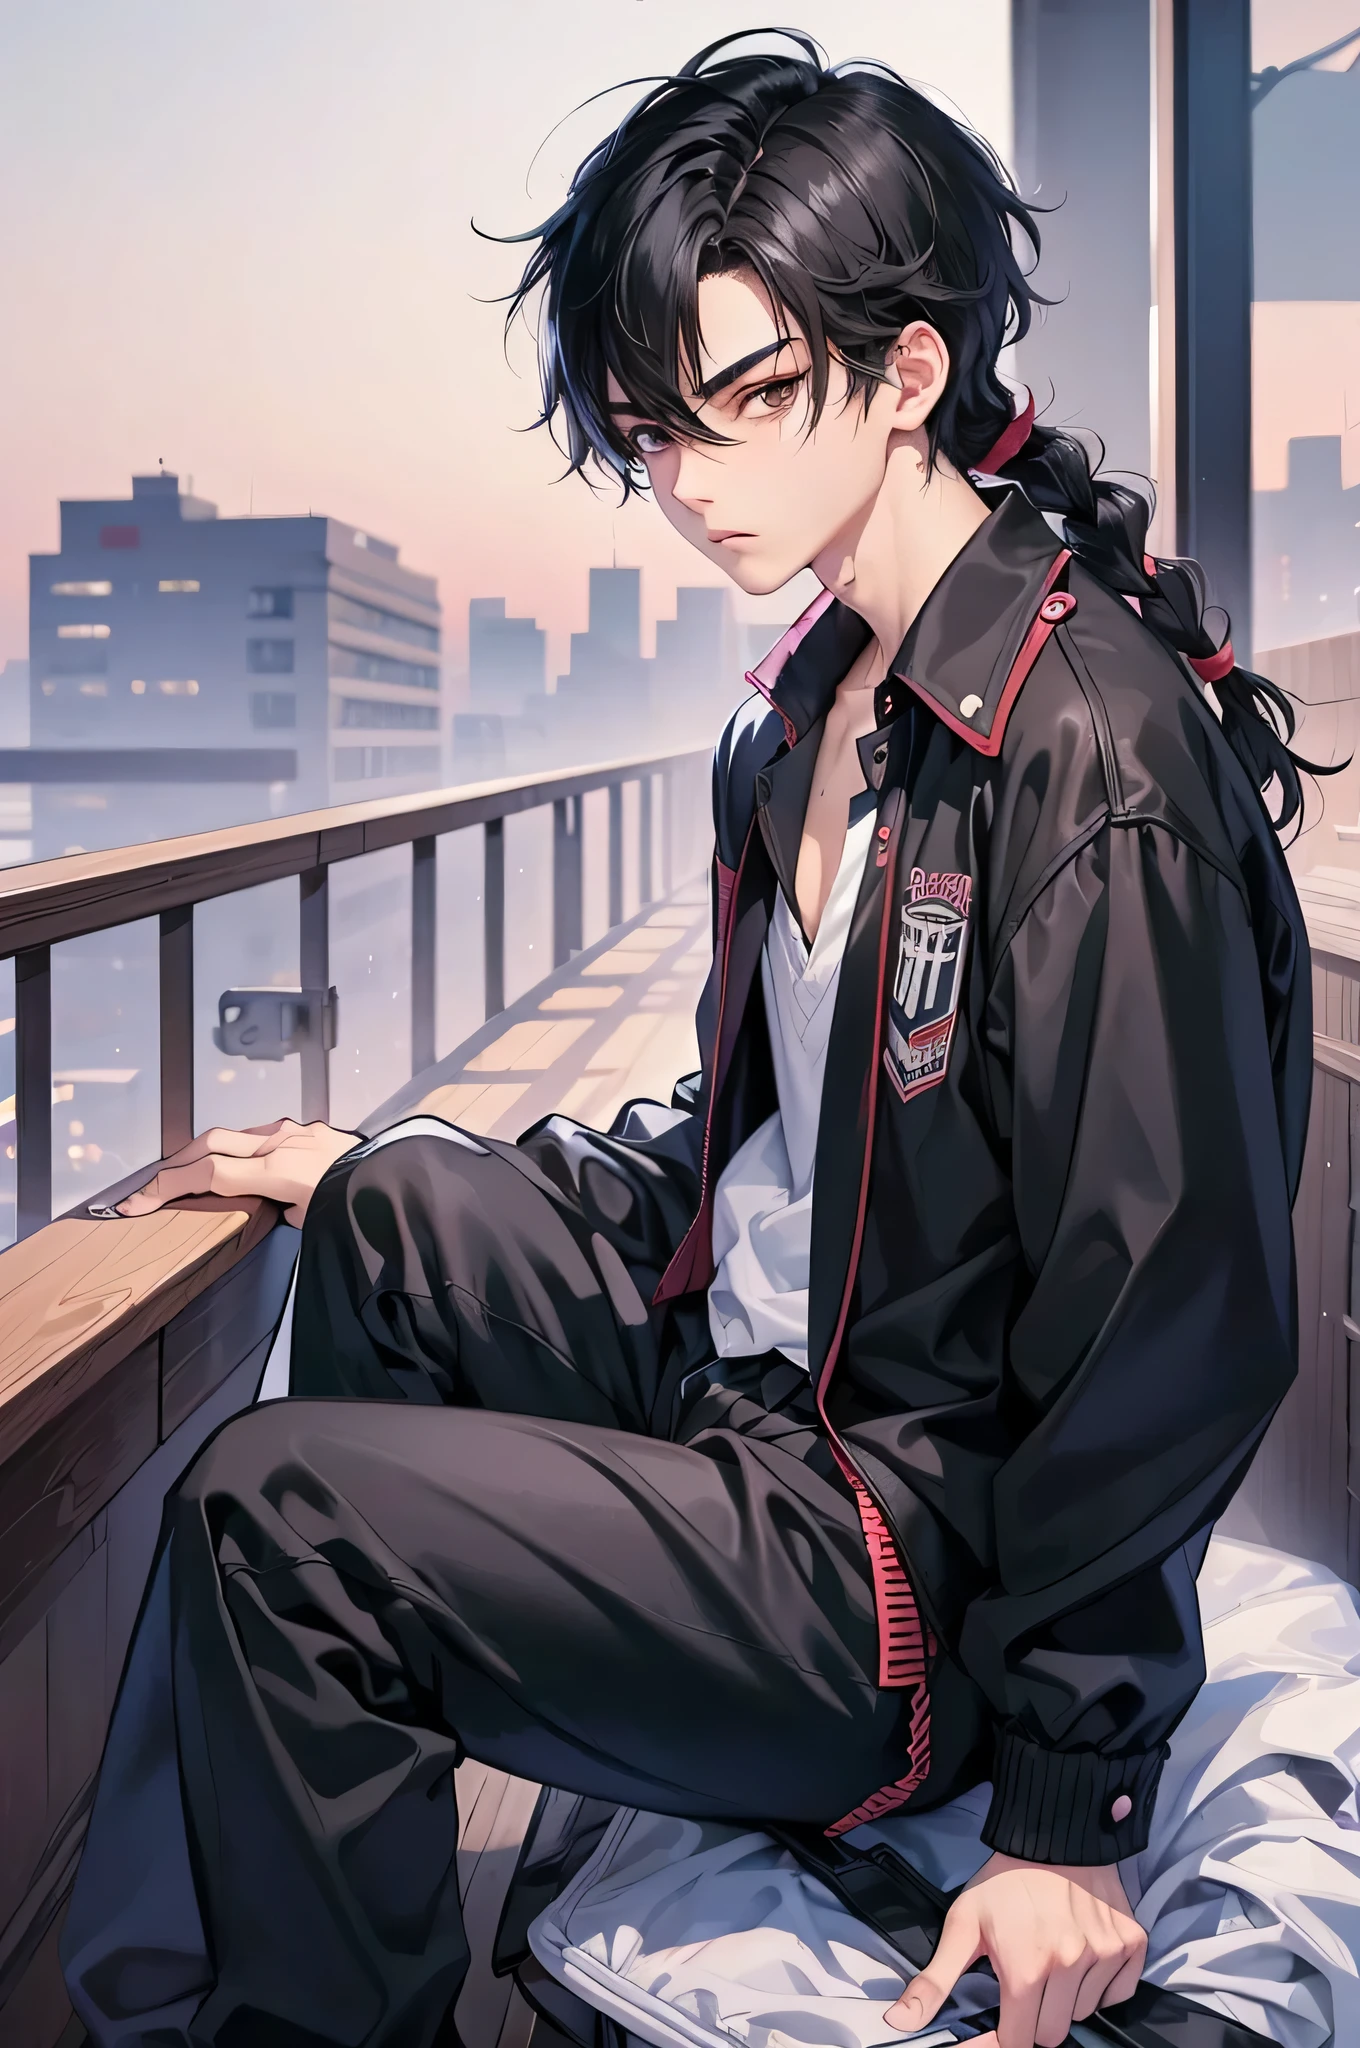 manga style, no color, stylized, 1 male, teenager, rebel, bully, high school student, messy black hair with one tiny frontal braid on the face, unbuttoned high , confident gaze, high school in the background (full body)